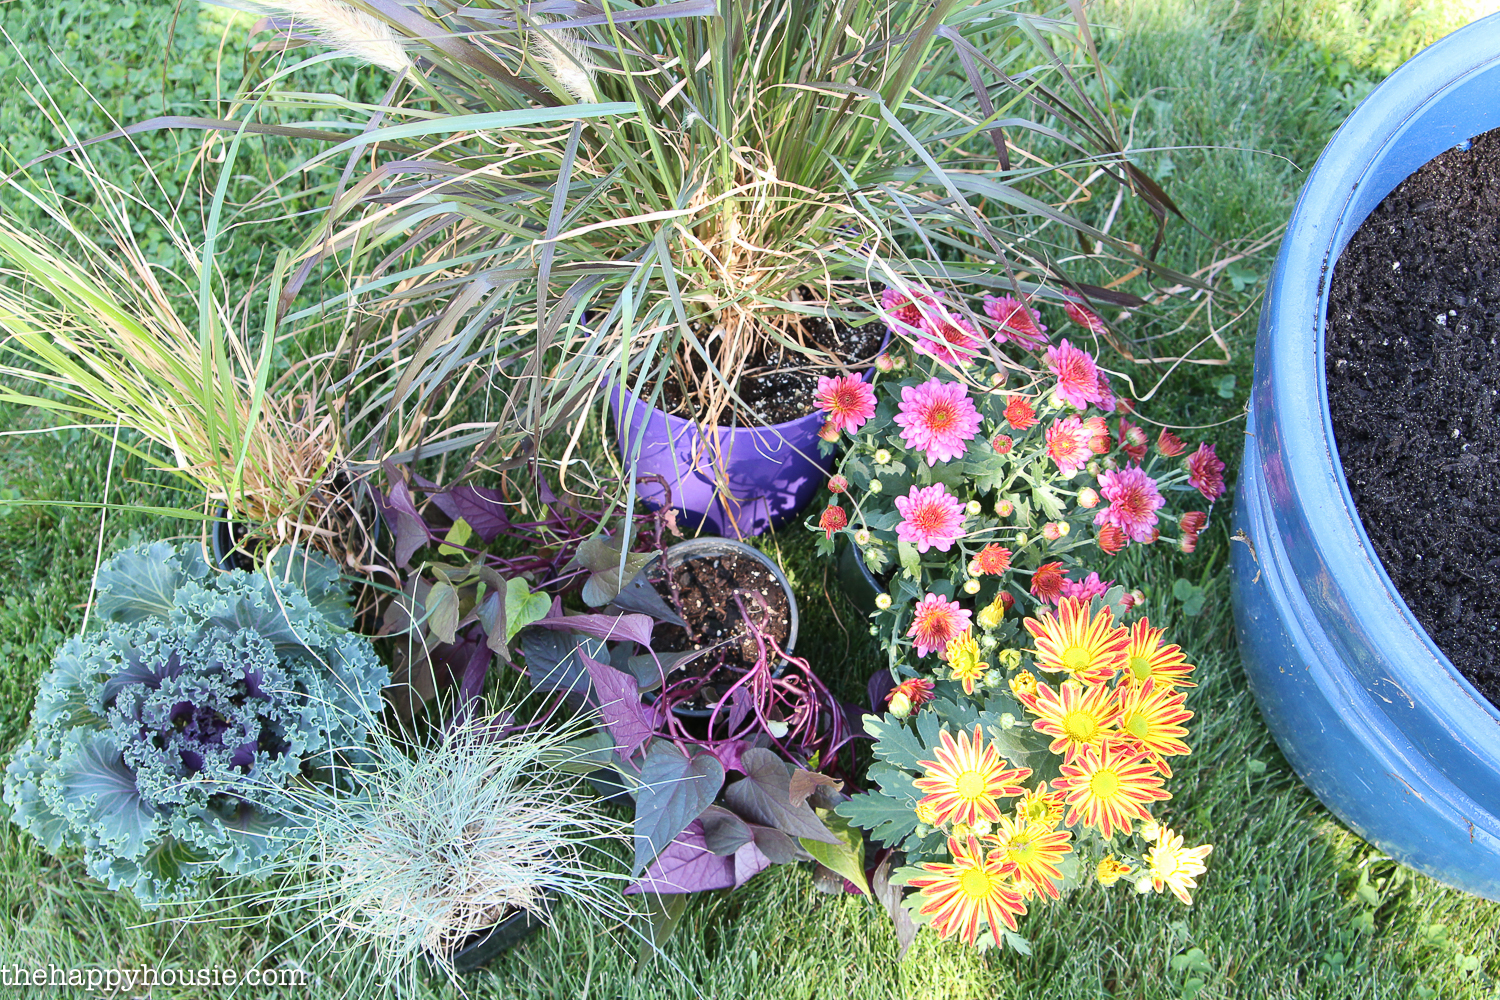 There are ornamental grasses, pink flowers, purple kale to be planted.